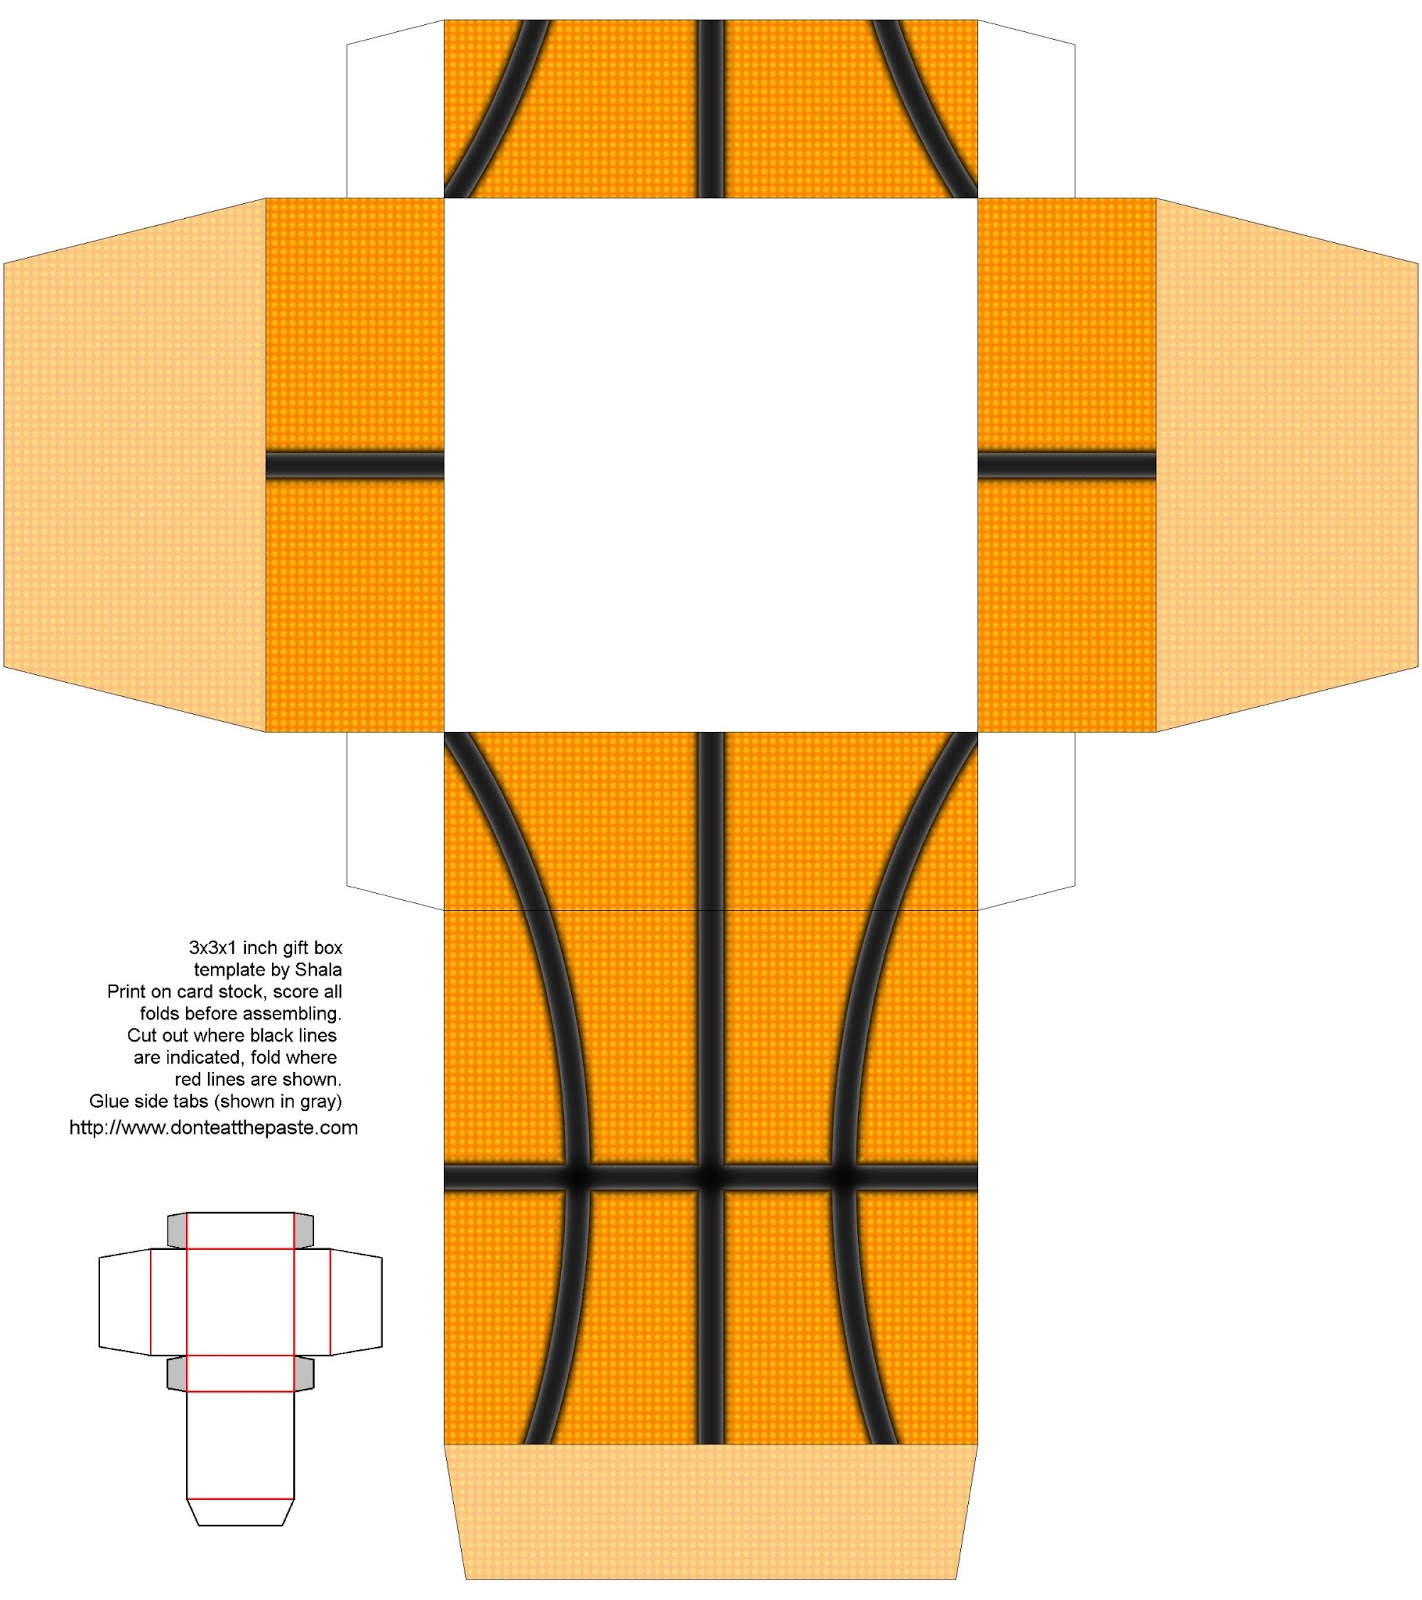 7-best-images-of-basketball-cut-out-printable-basketball-cut-out-templates-basketball-gift